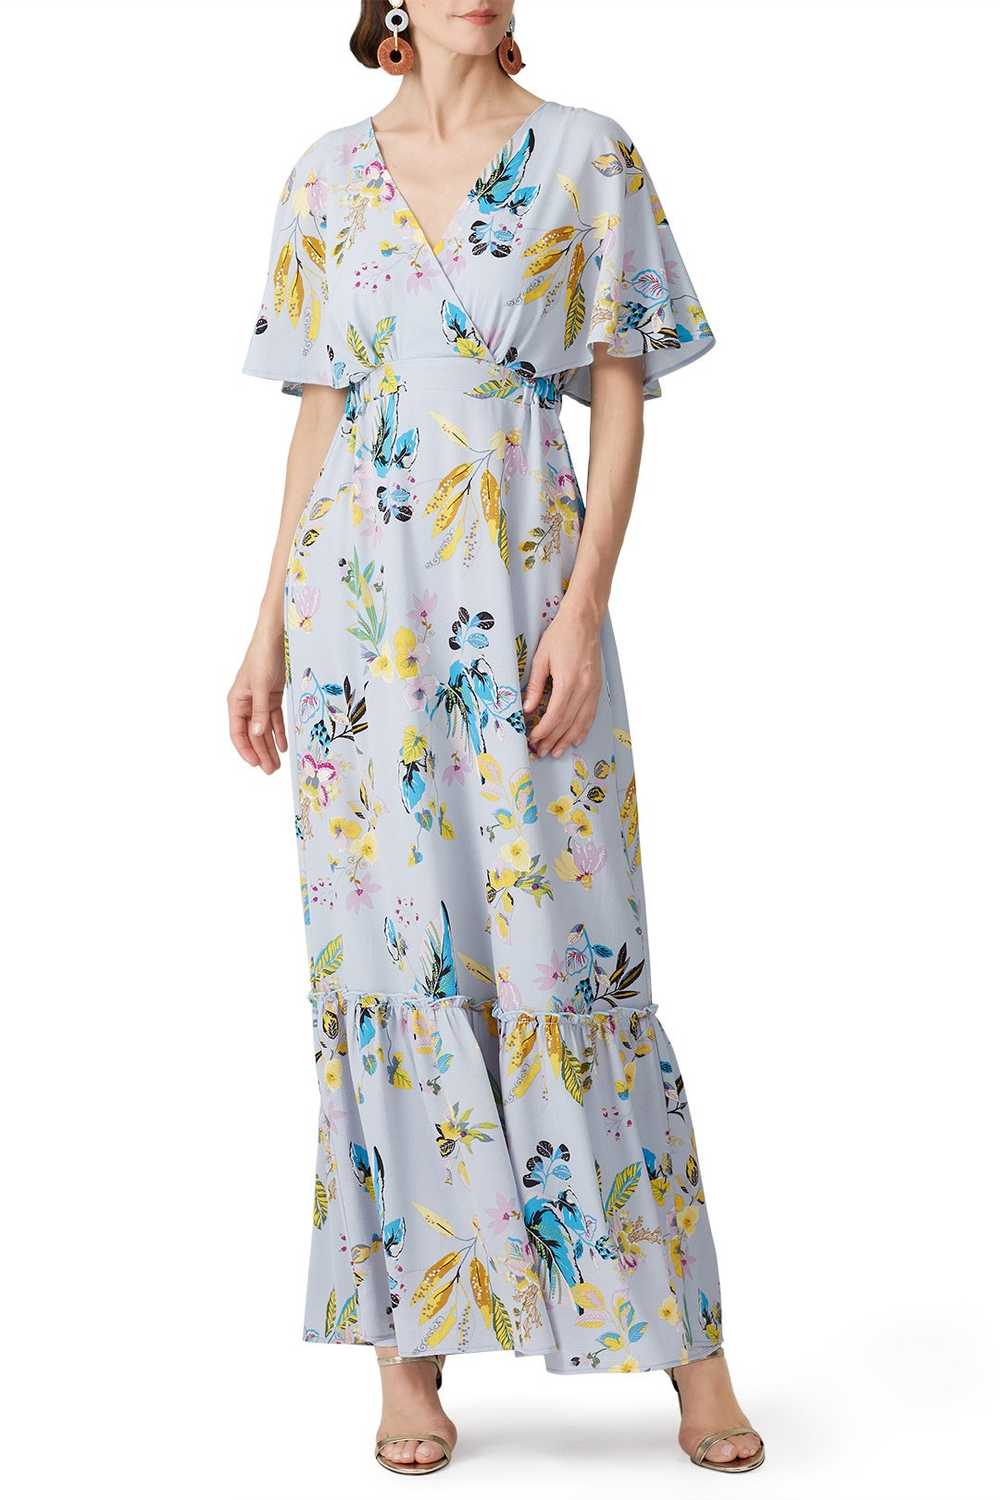 Slate & Willow Floral Dolman Maxi - image 1